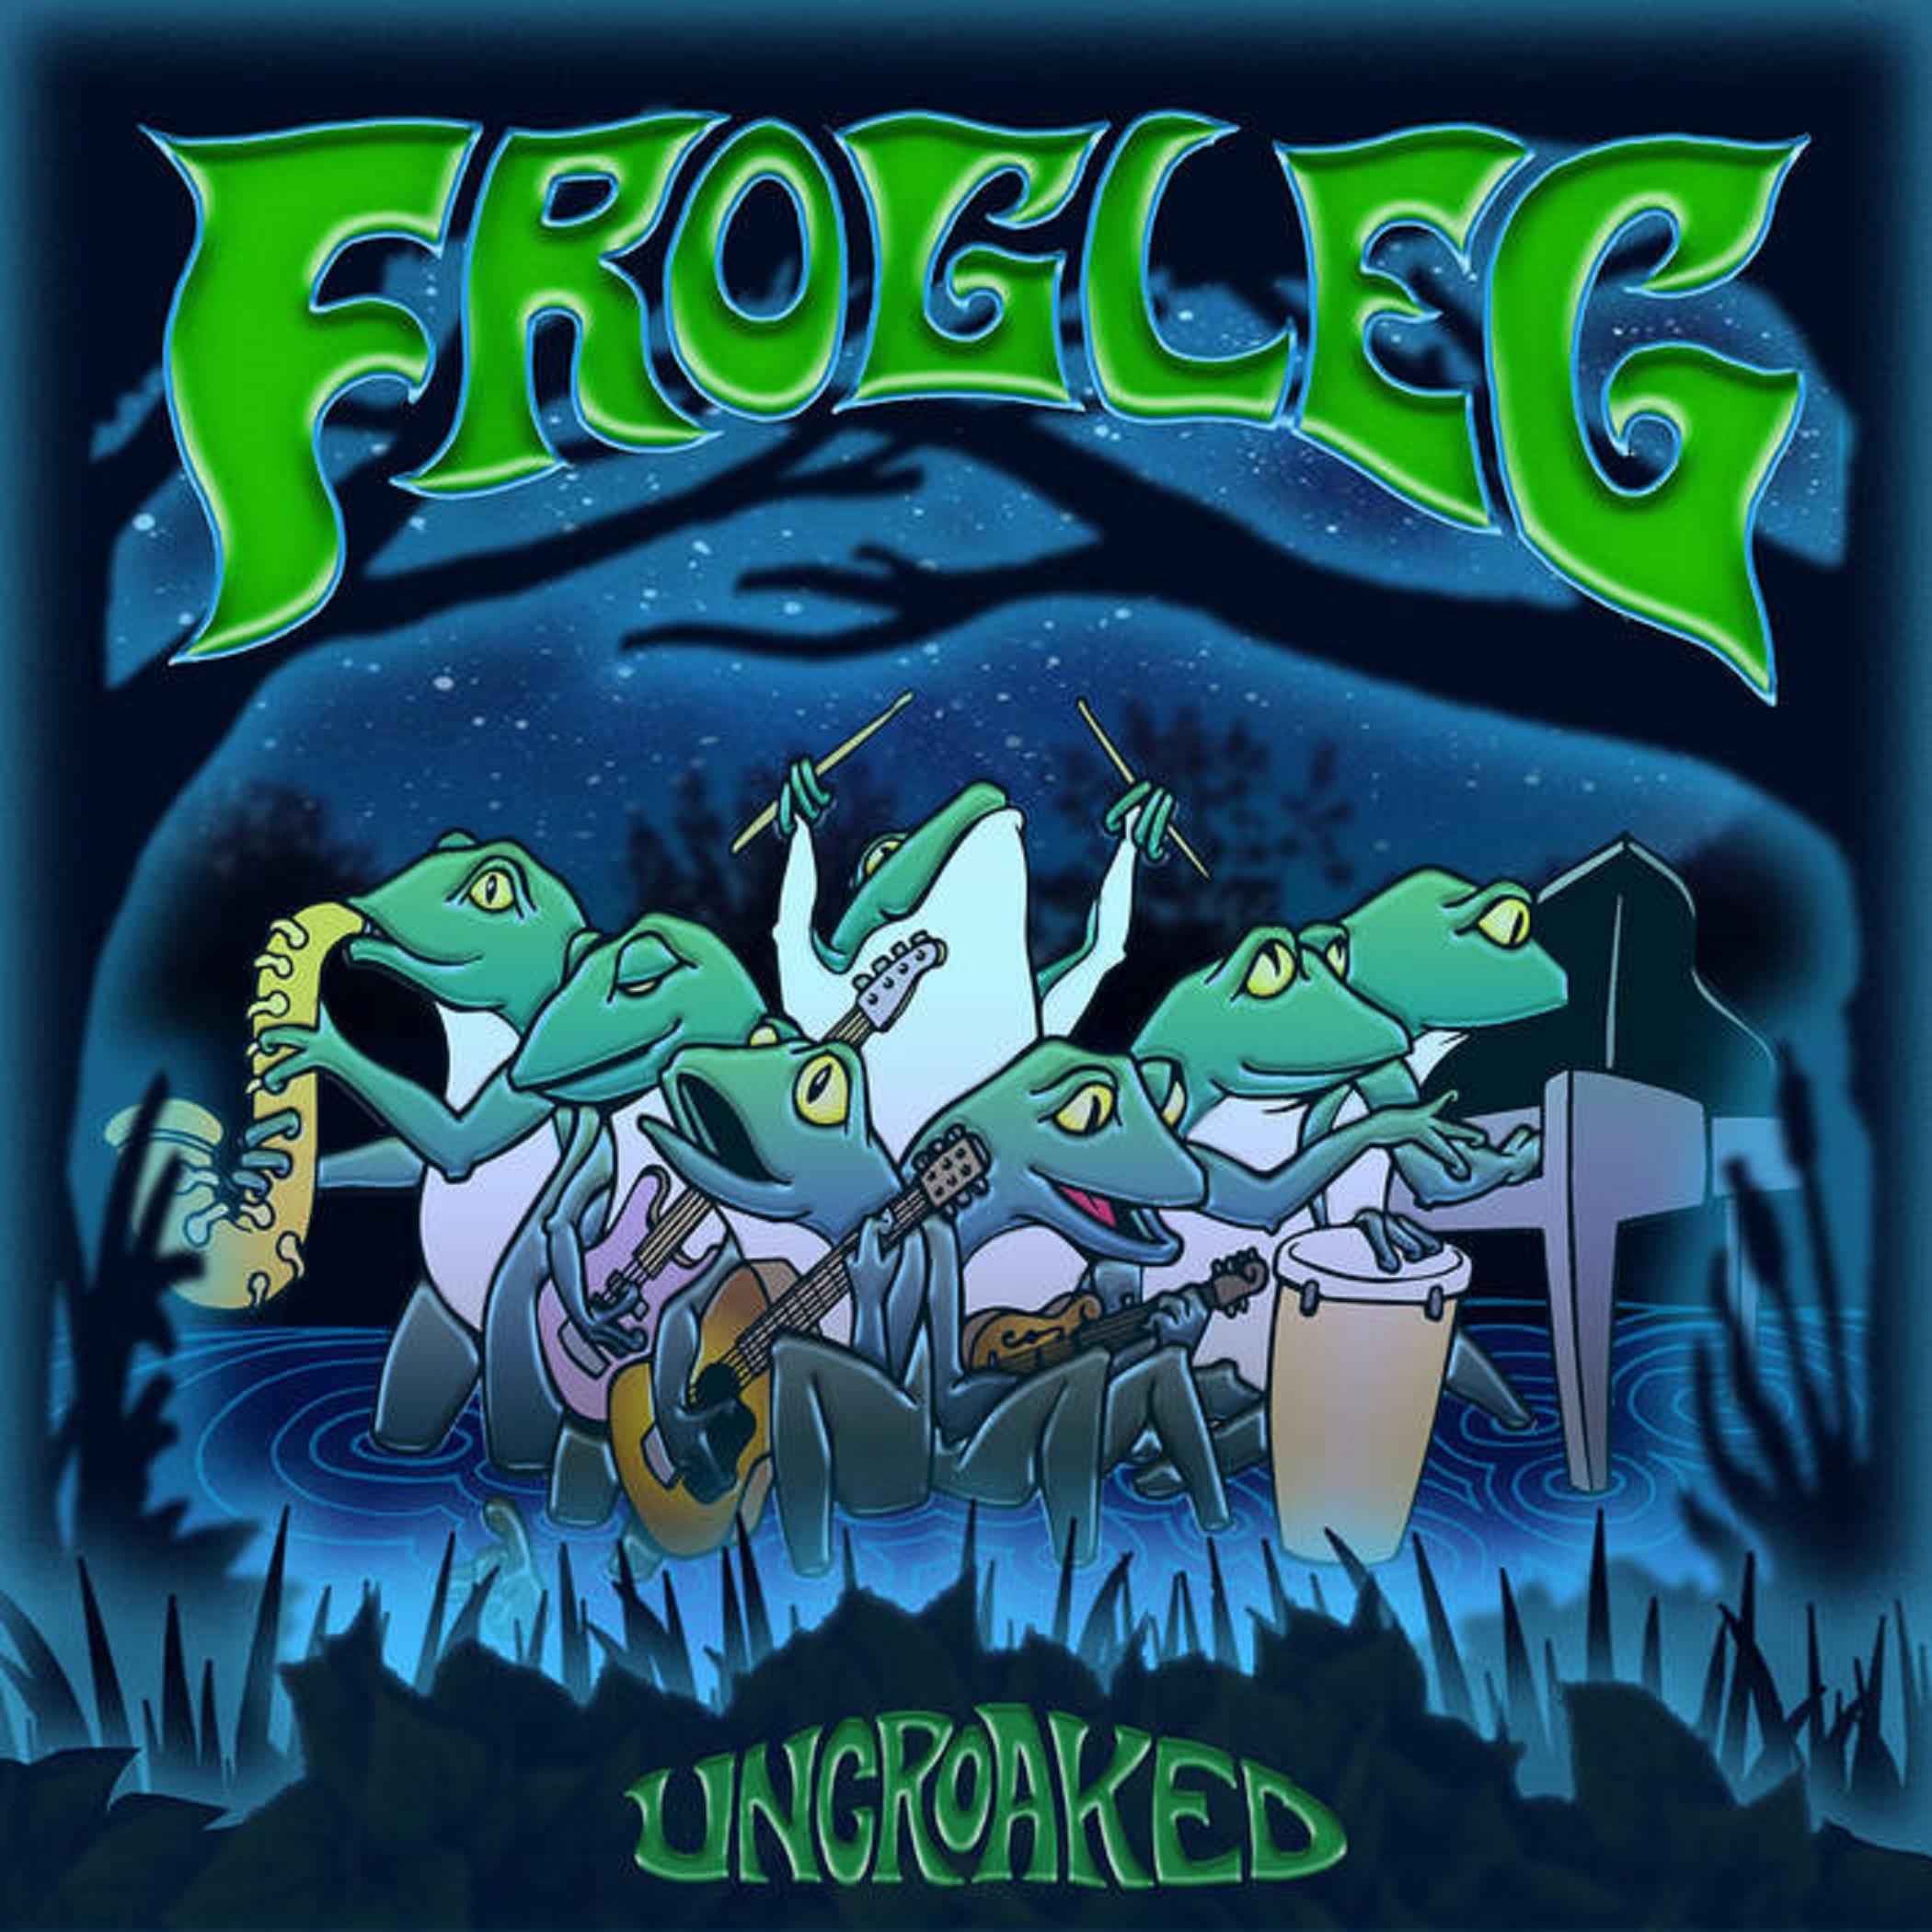 REVIEW: Frogleg's "Uncroaked"